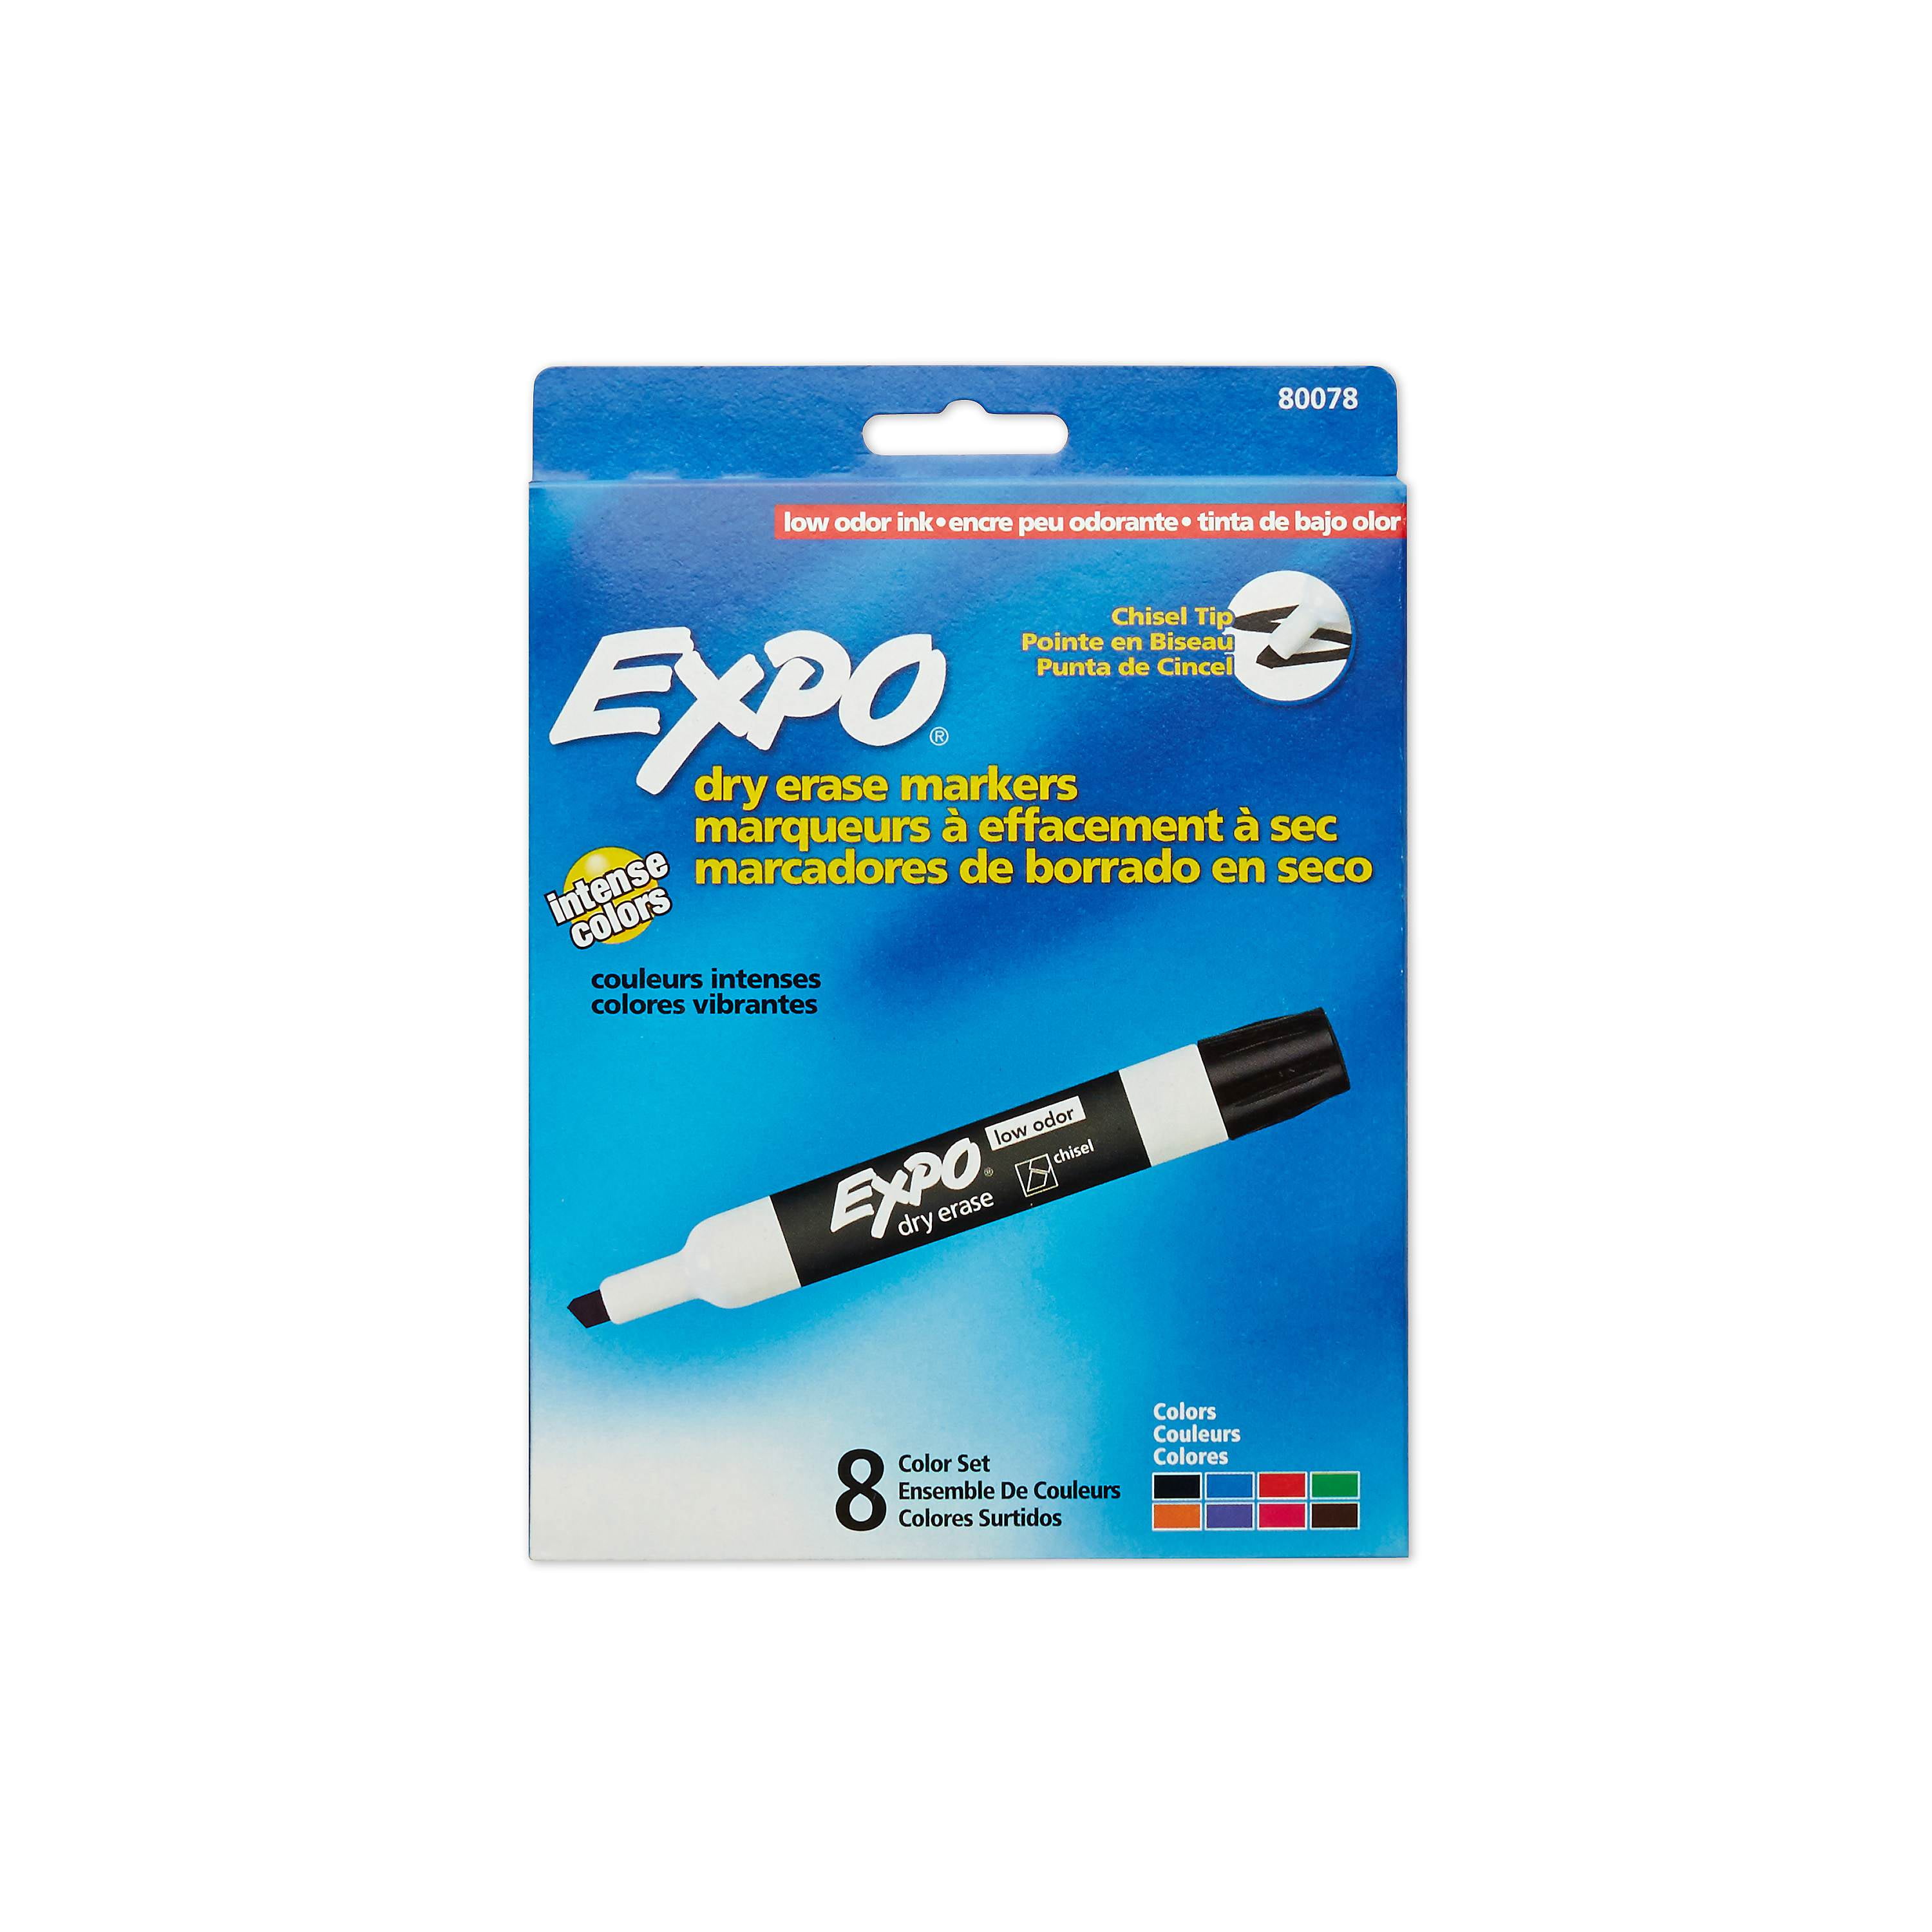 Lot of 8 EXPO Dry Erase Markers with Ink Indicator Chisel Tip Black Low Odor 